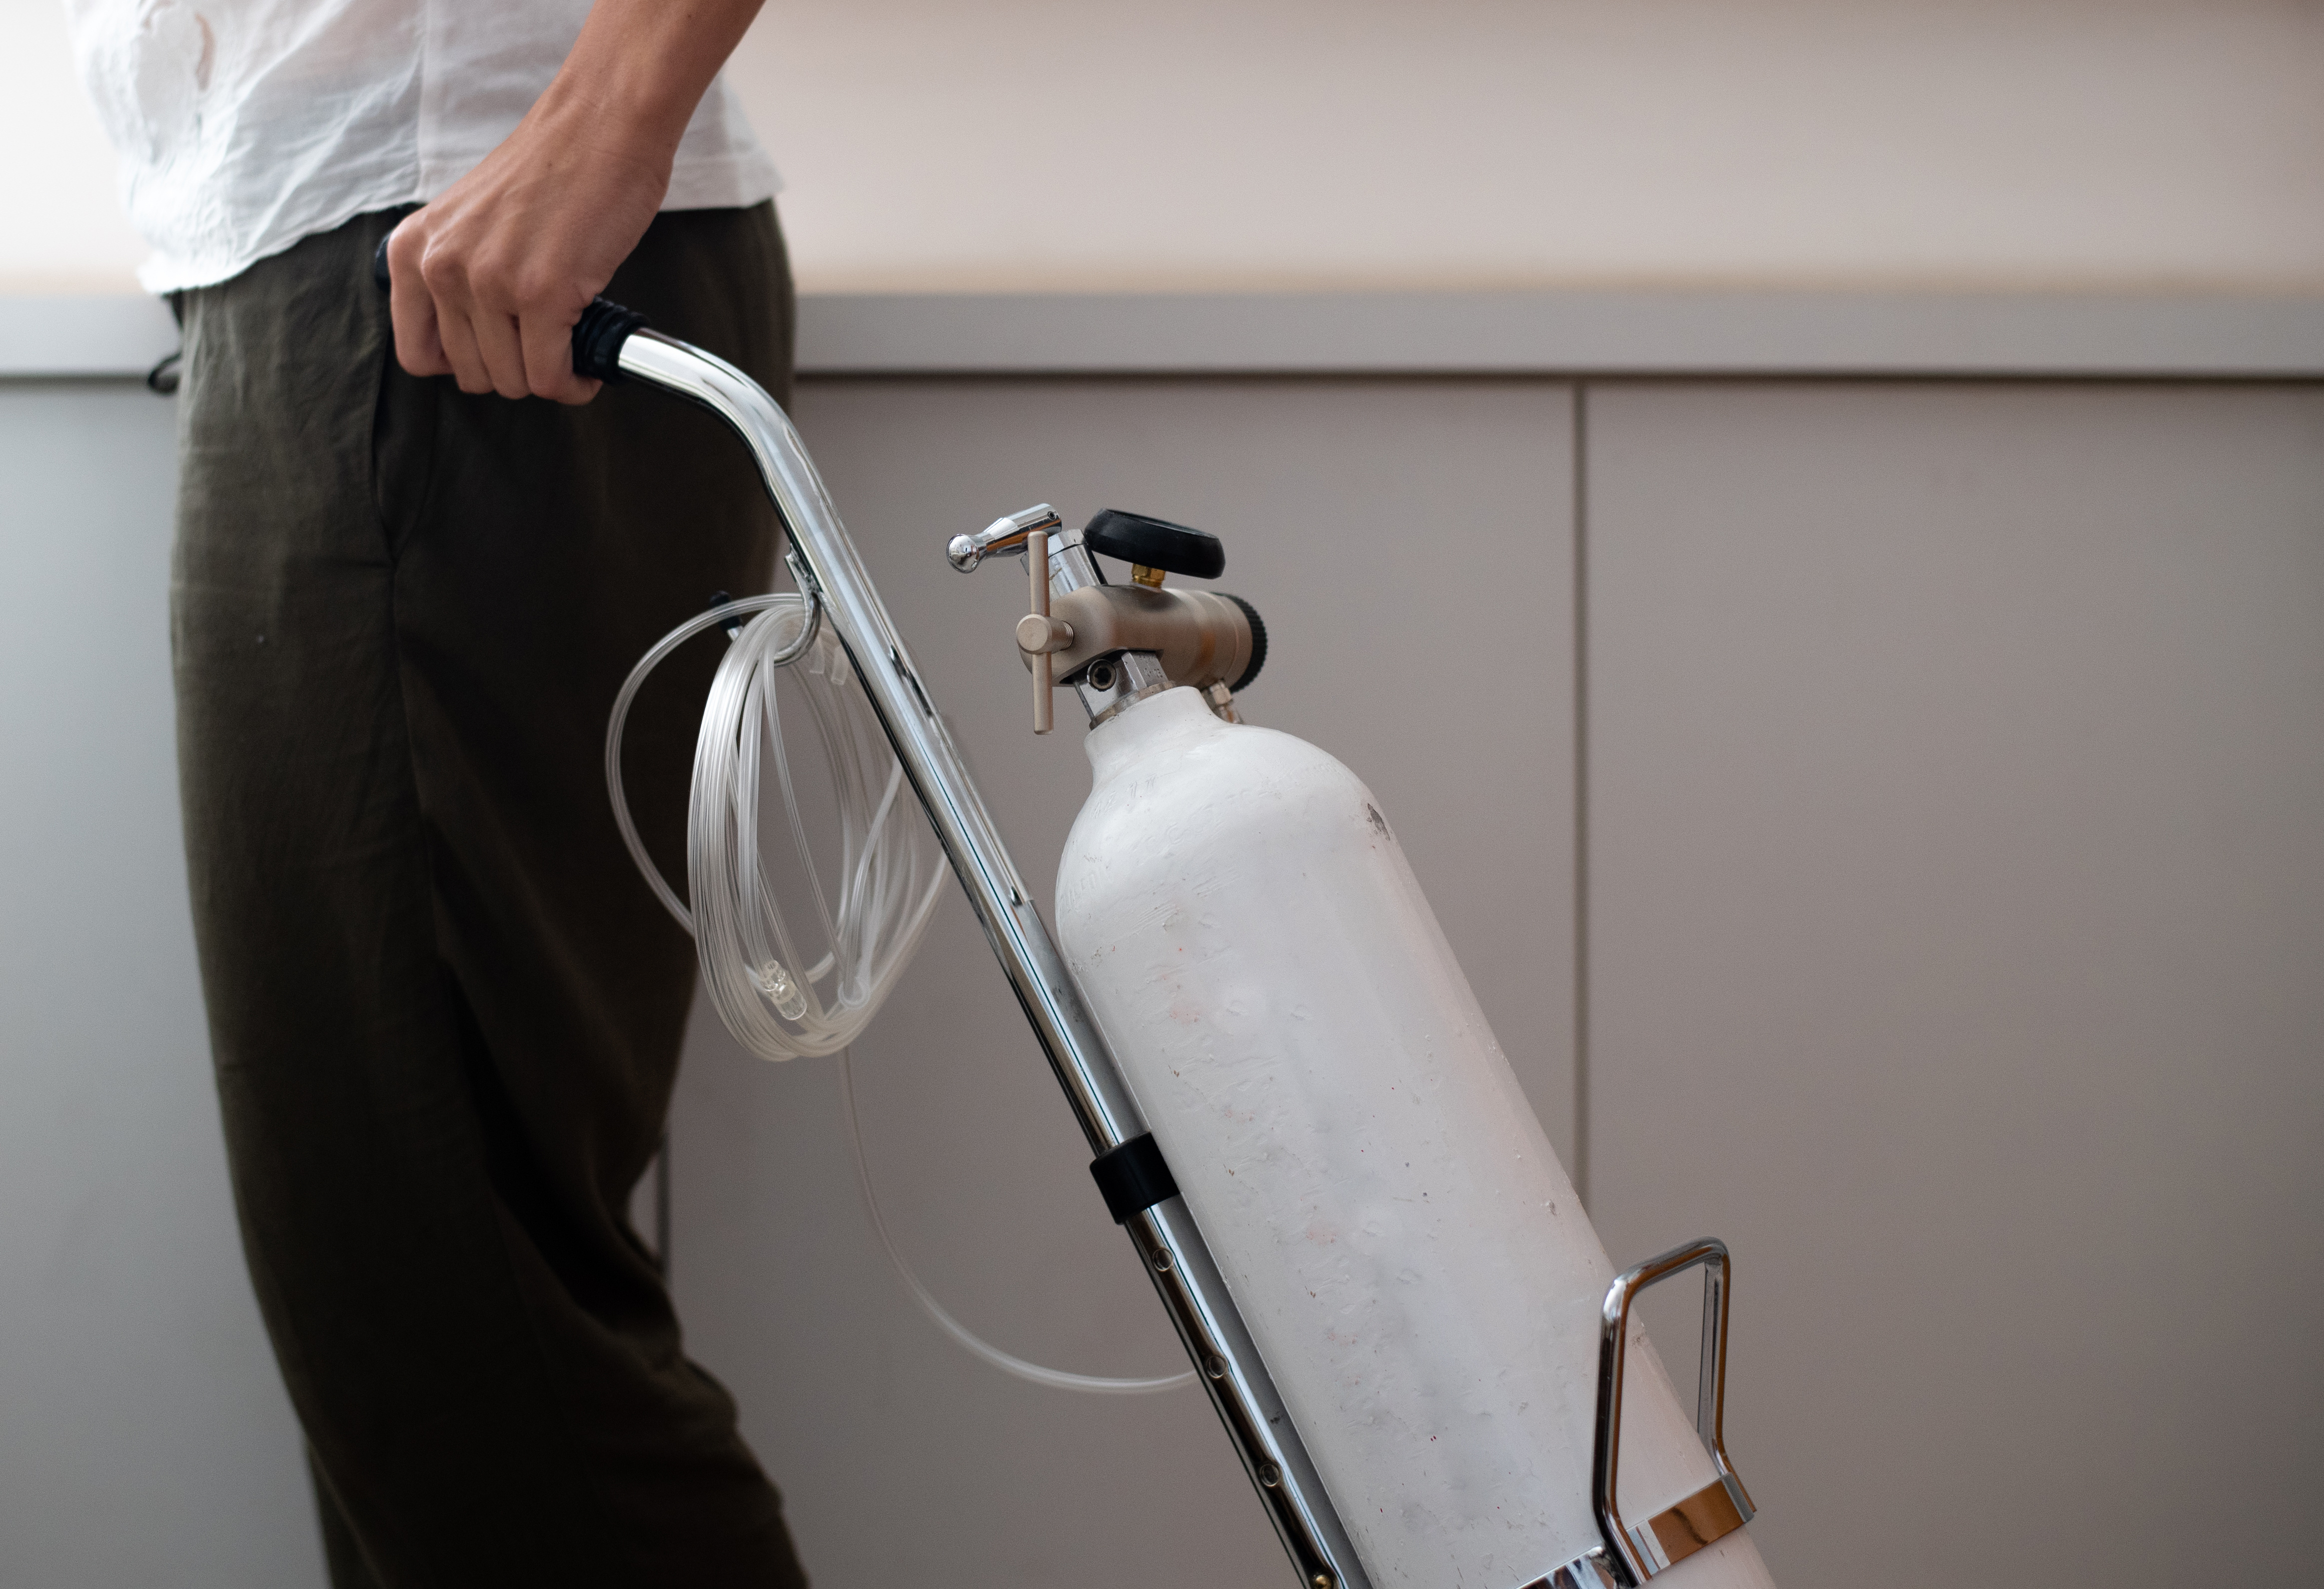 Does Medicare Cover Portable Oxygen Concentrators?